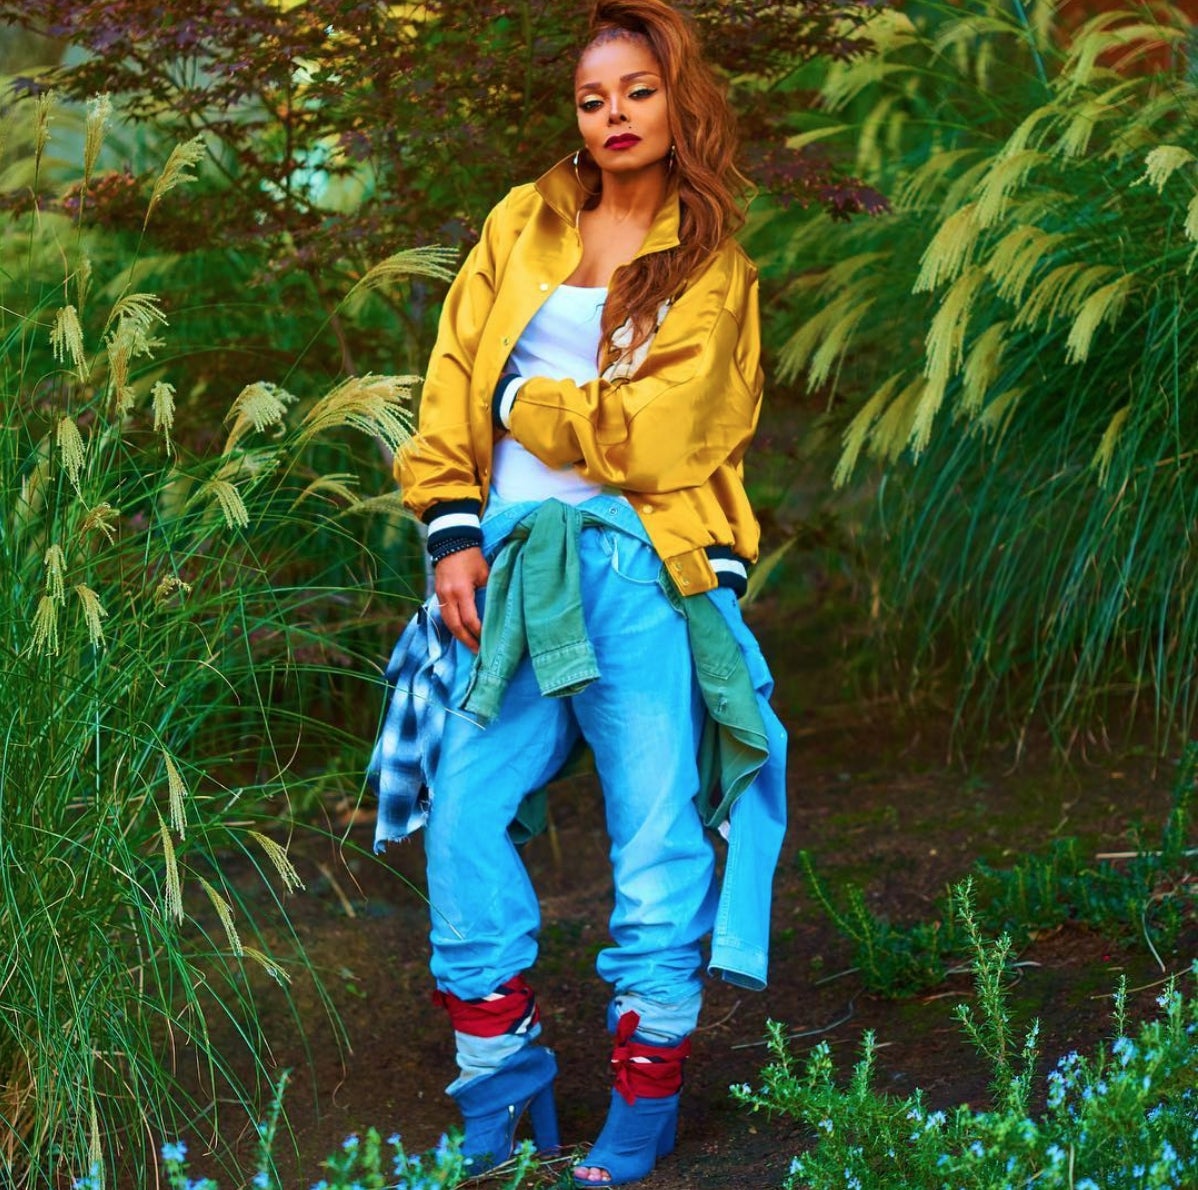 Janet Jackson On Motherhood, Daniel Caesar, Activism, Kanye & More: 15 Things We Learned From Her Candid Billboard Interview